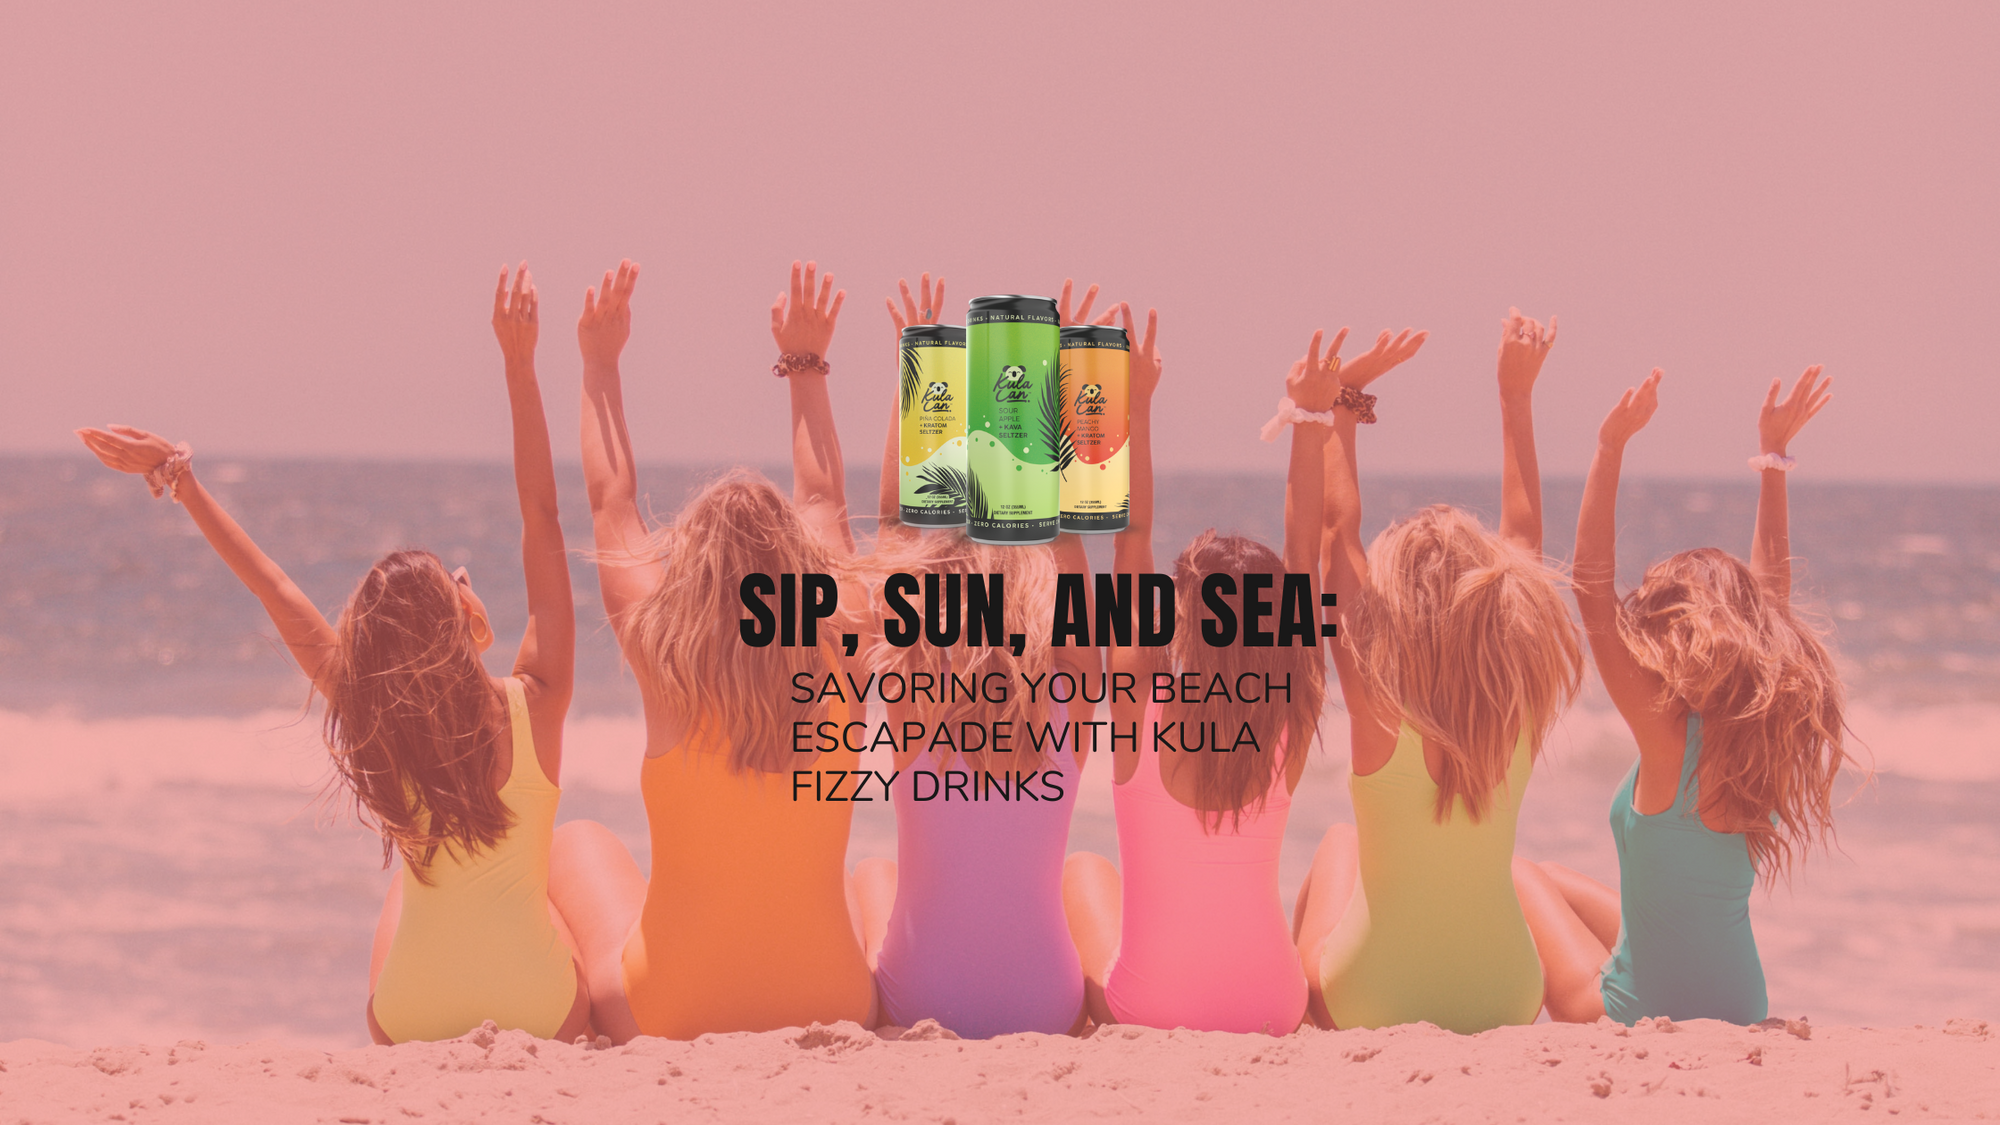 Sip, Sun, and Sea: Savoring Your Beach Escapade with Kula Fizzy Drinks